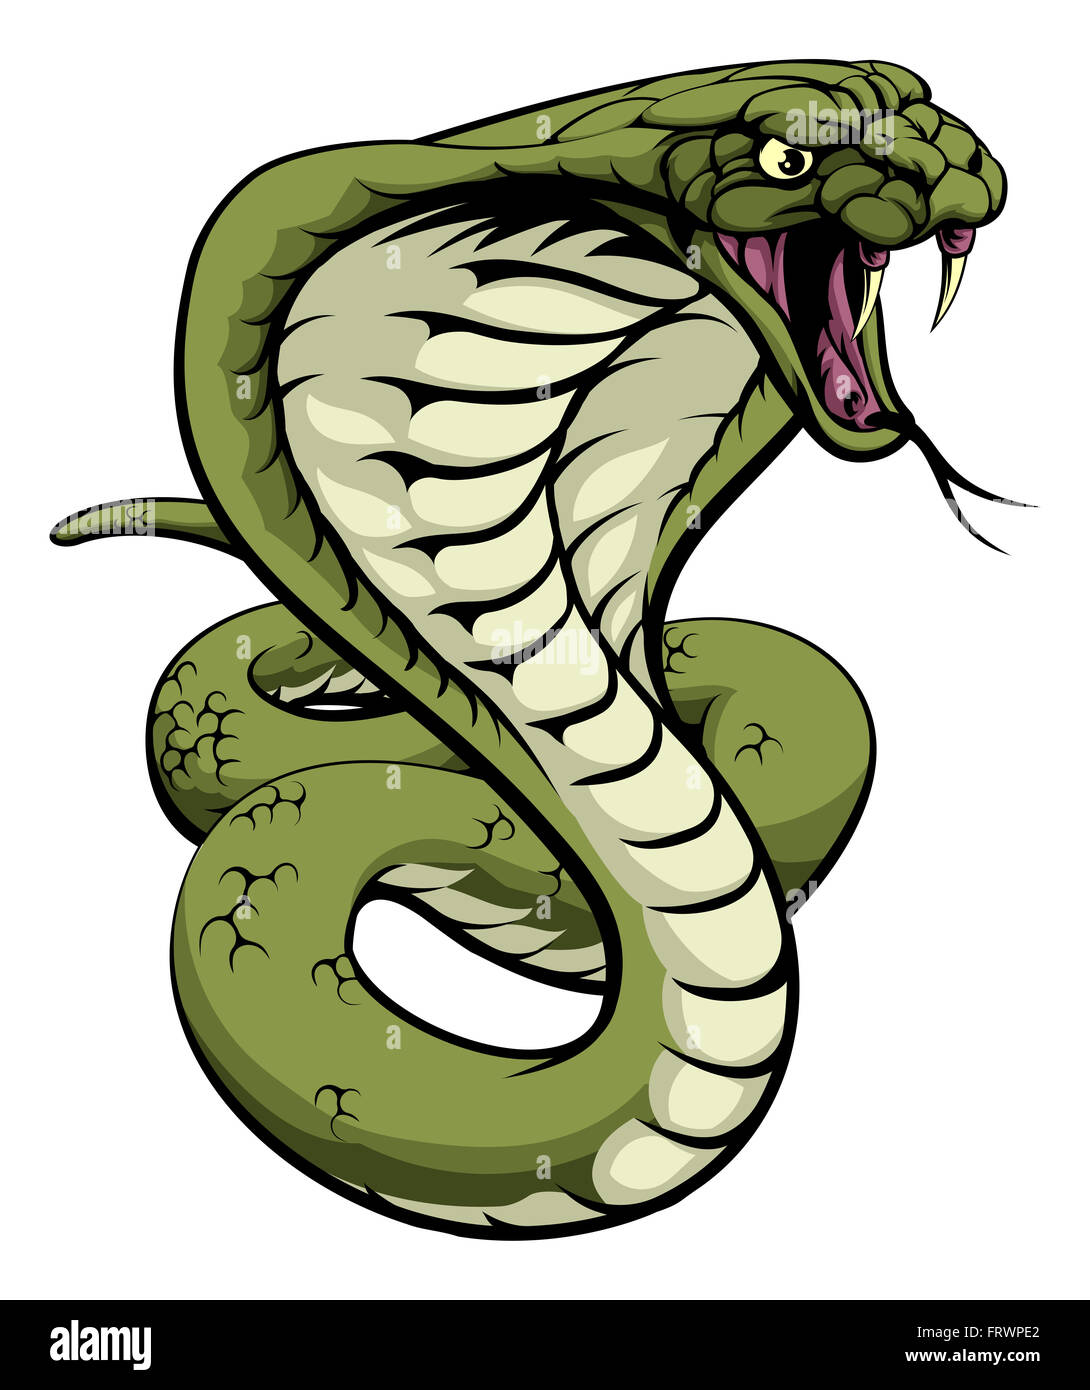 An illustration of a king cobra snake with hood out about to strike Stock Photo